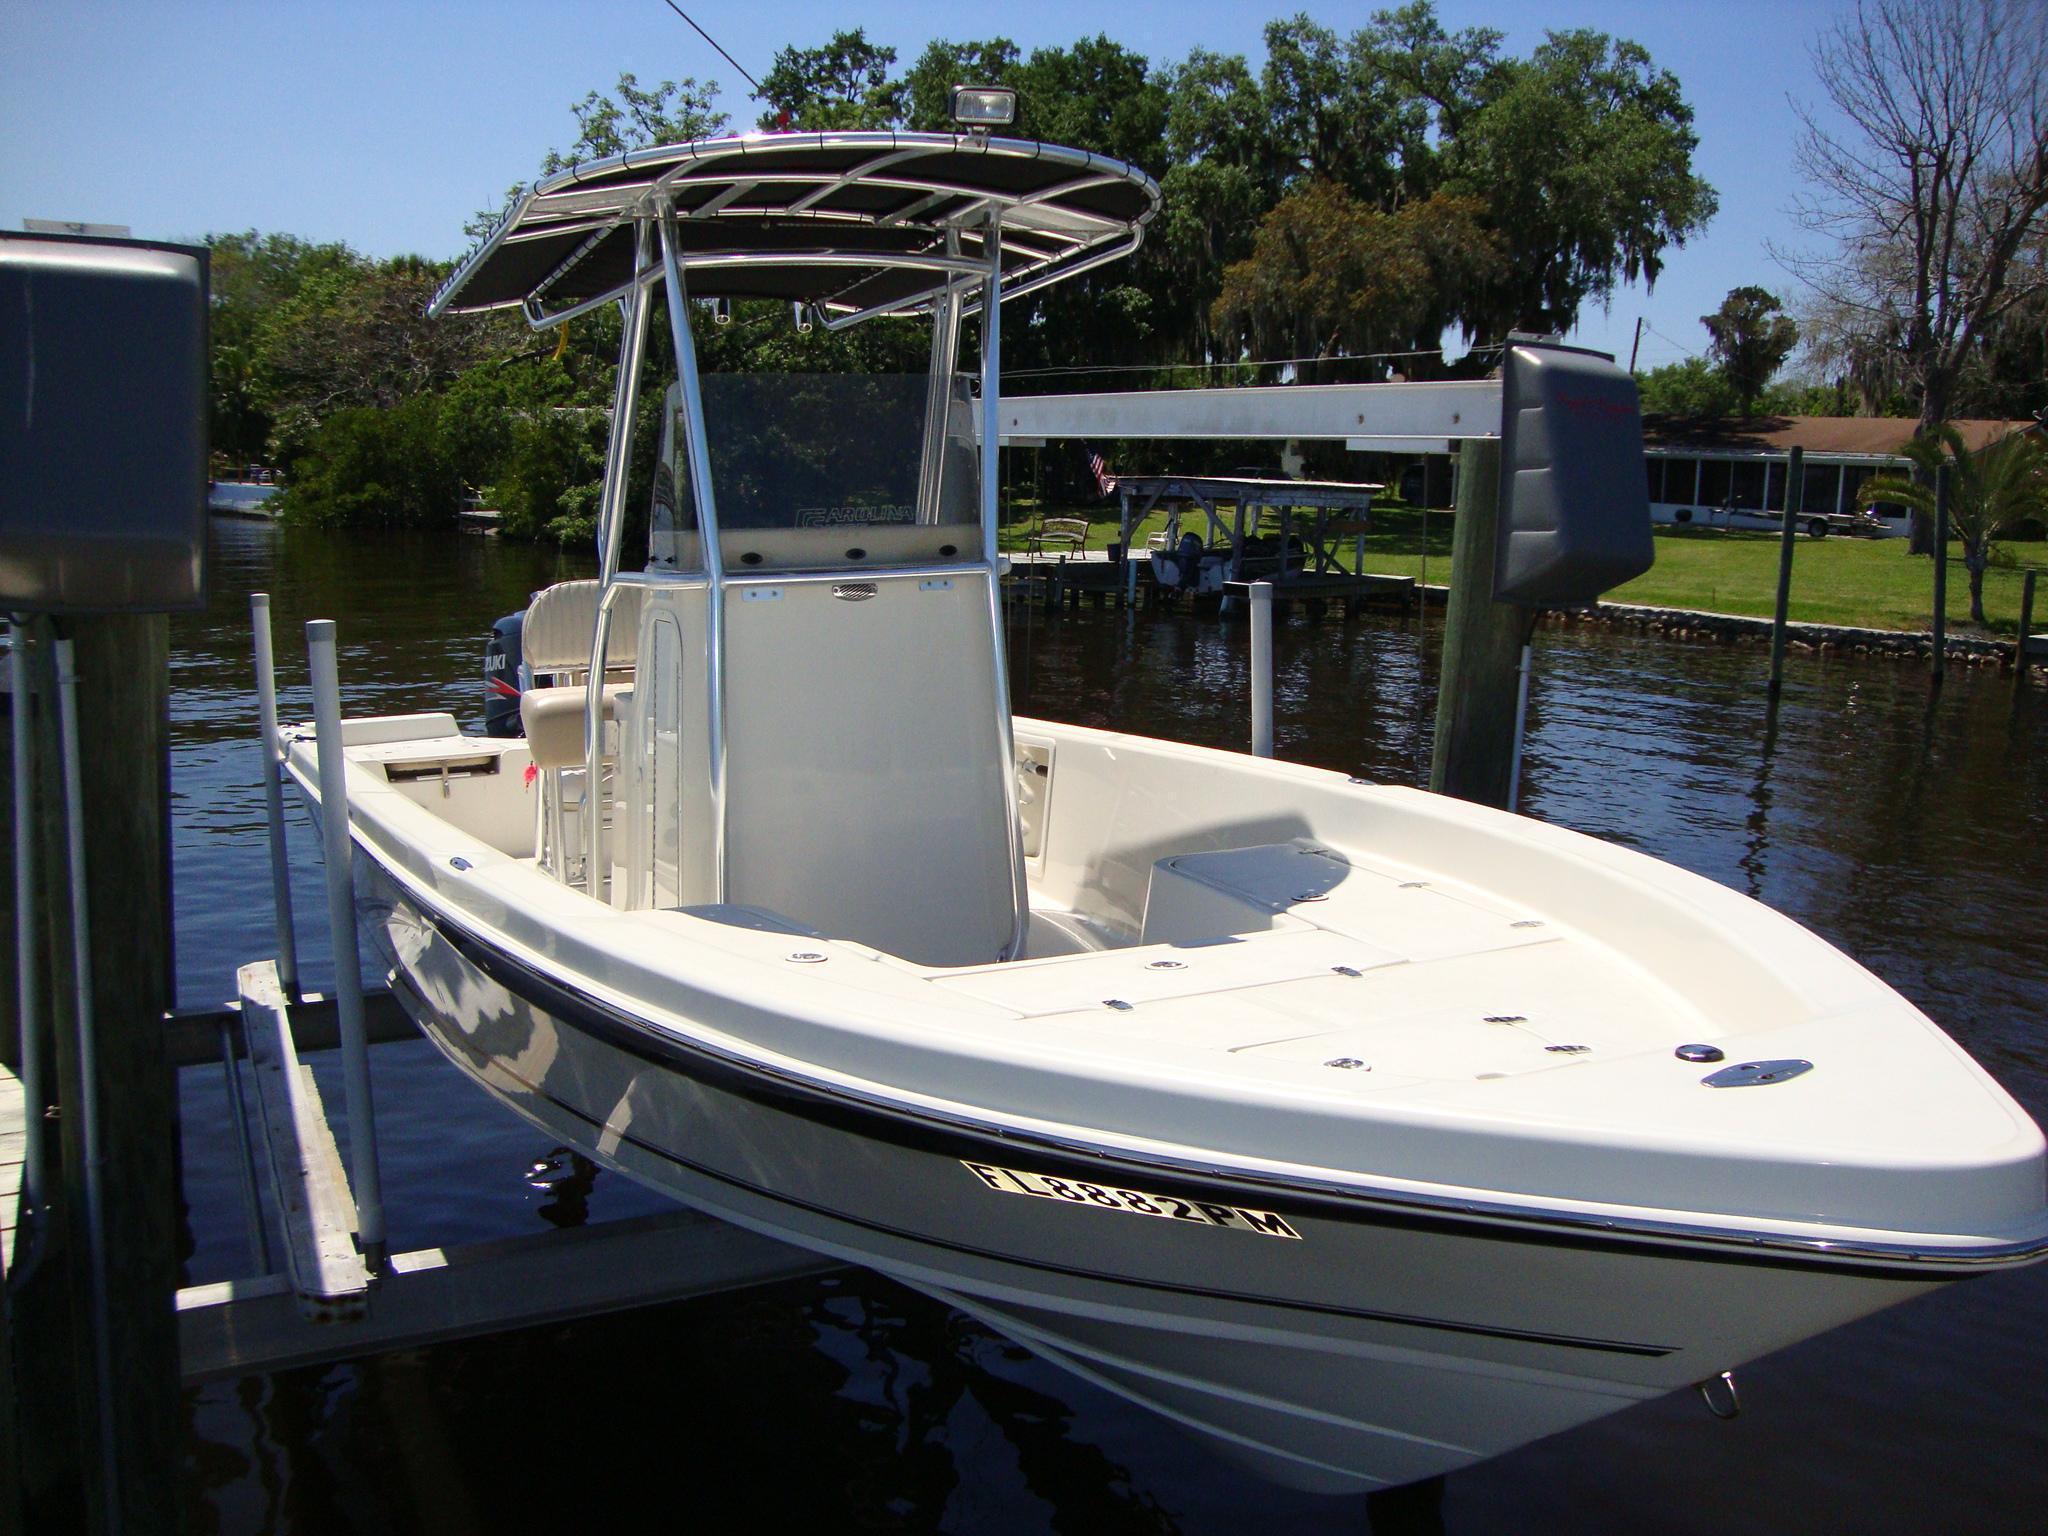 Sea Chaser 250 LX Bay Runner, Parrish